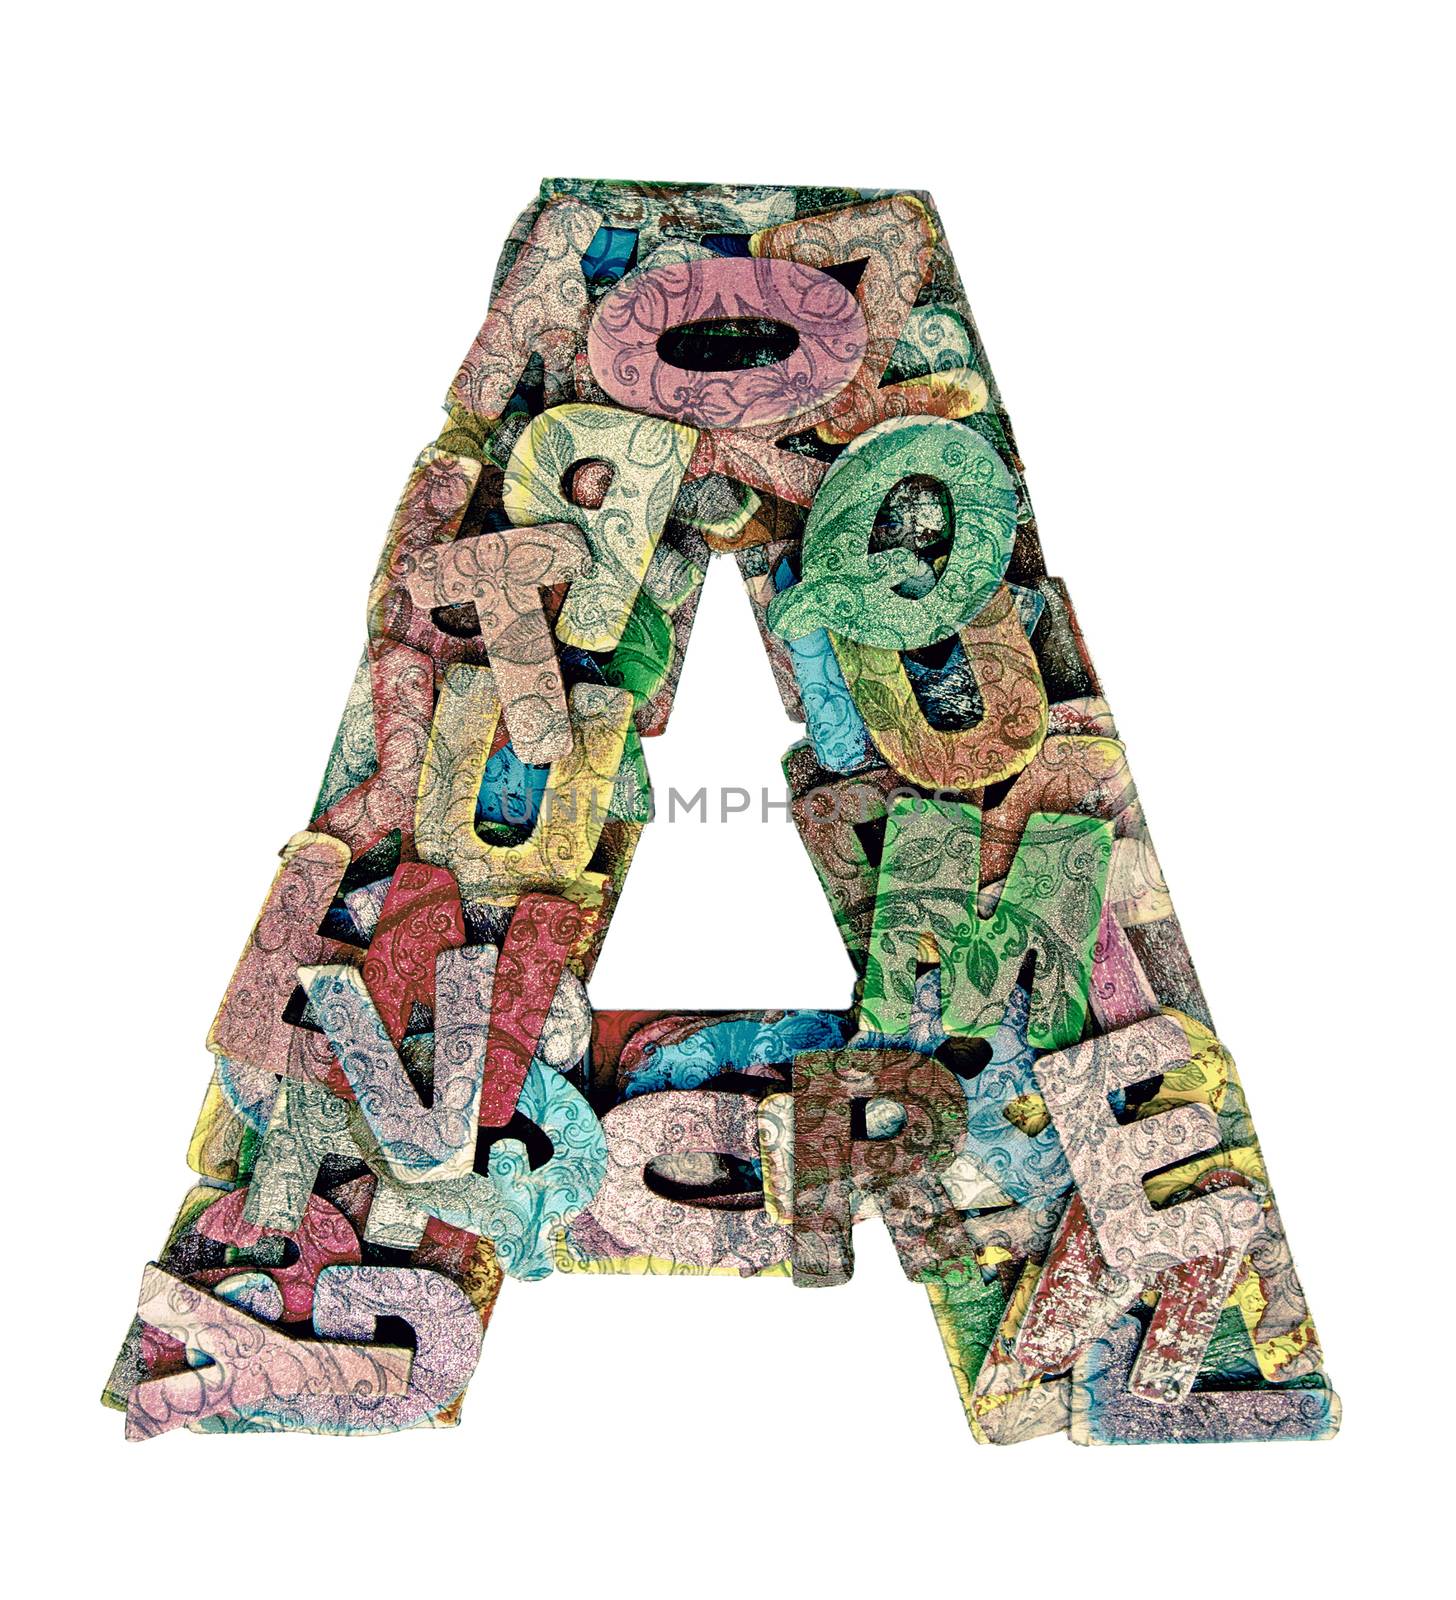 lots of small wooden letters to make up the letter A